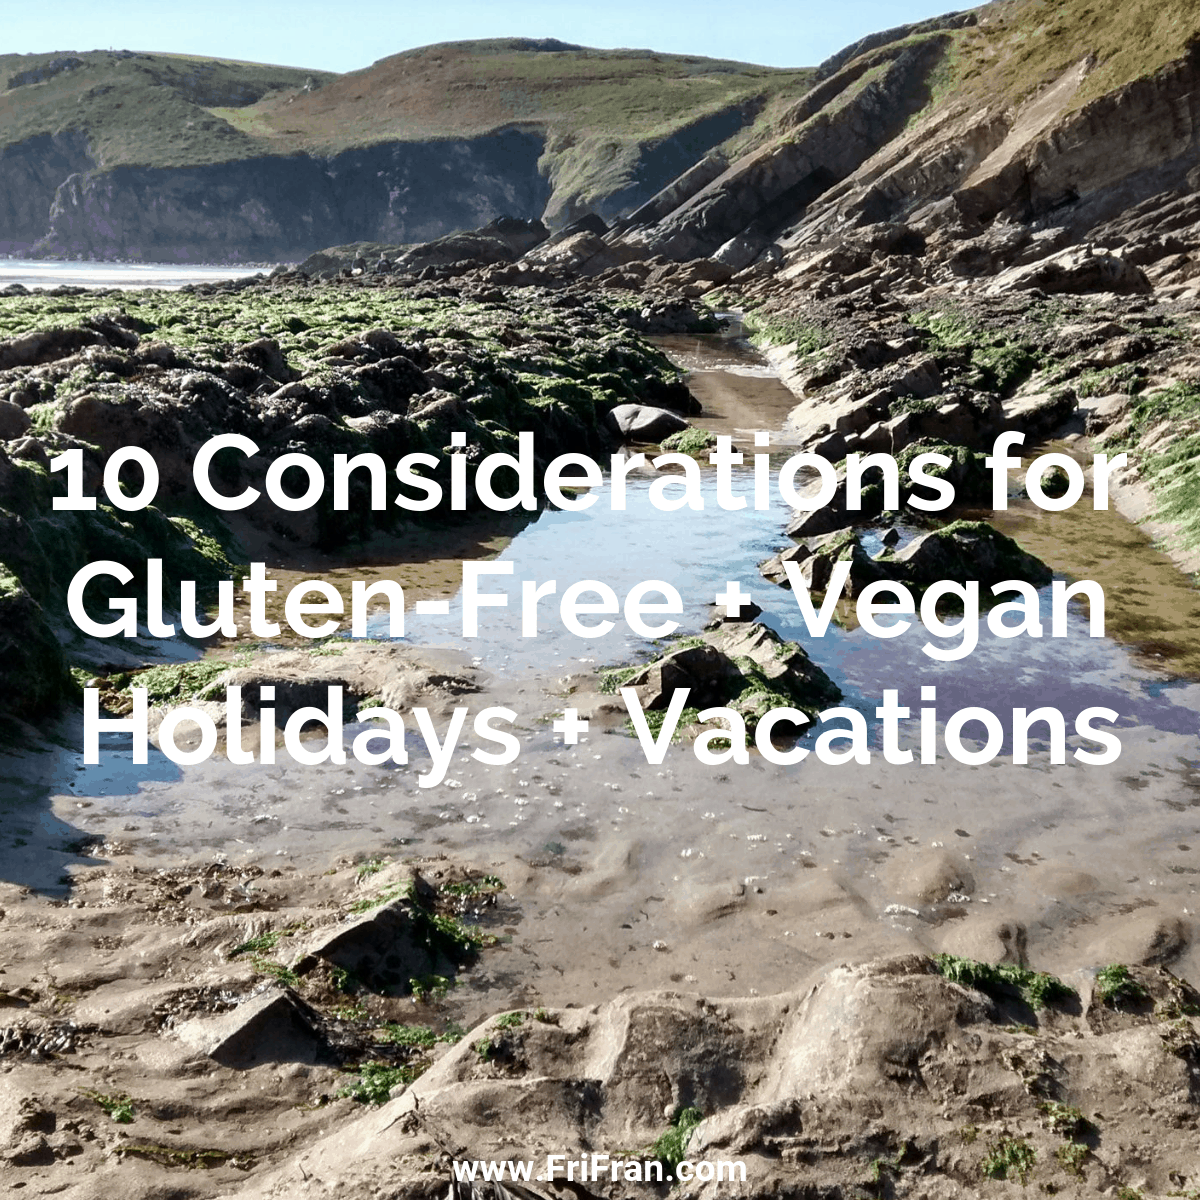 Top 10 Considerations for Gluten-Free, Vegan Holidays and Vacations